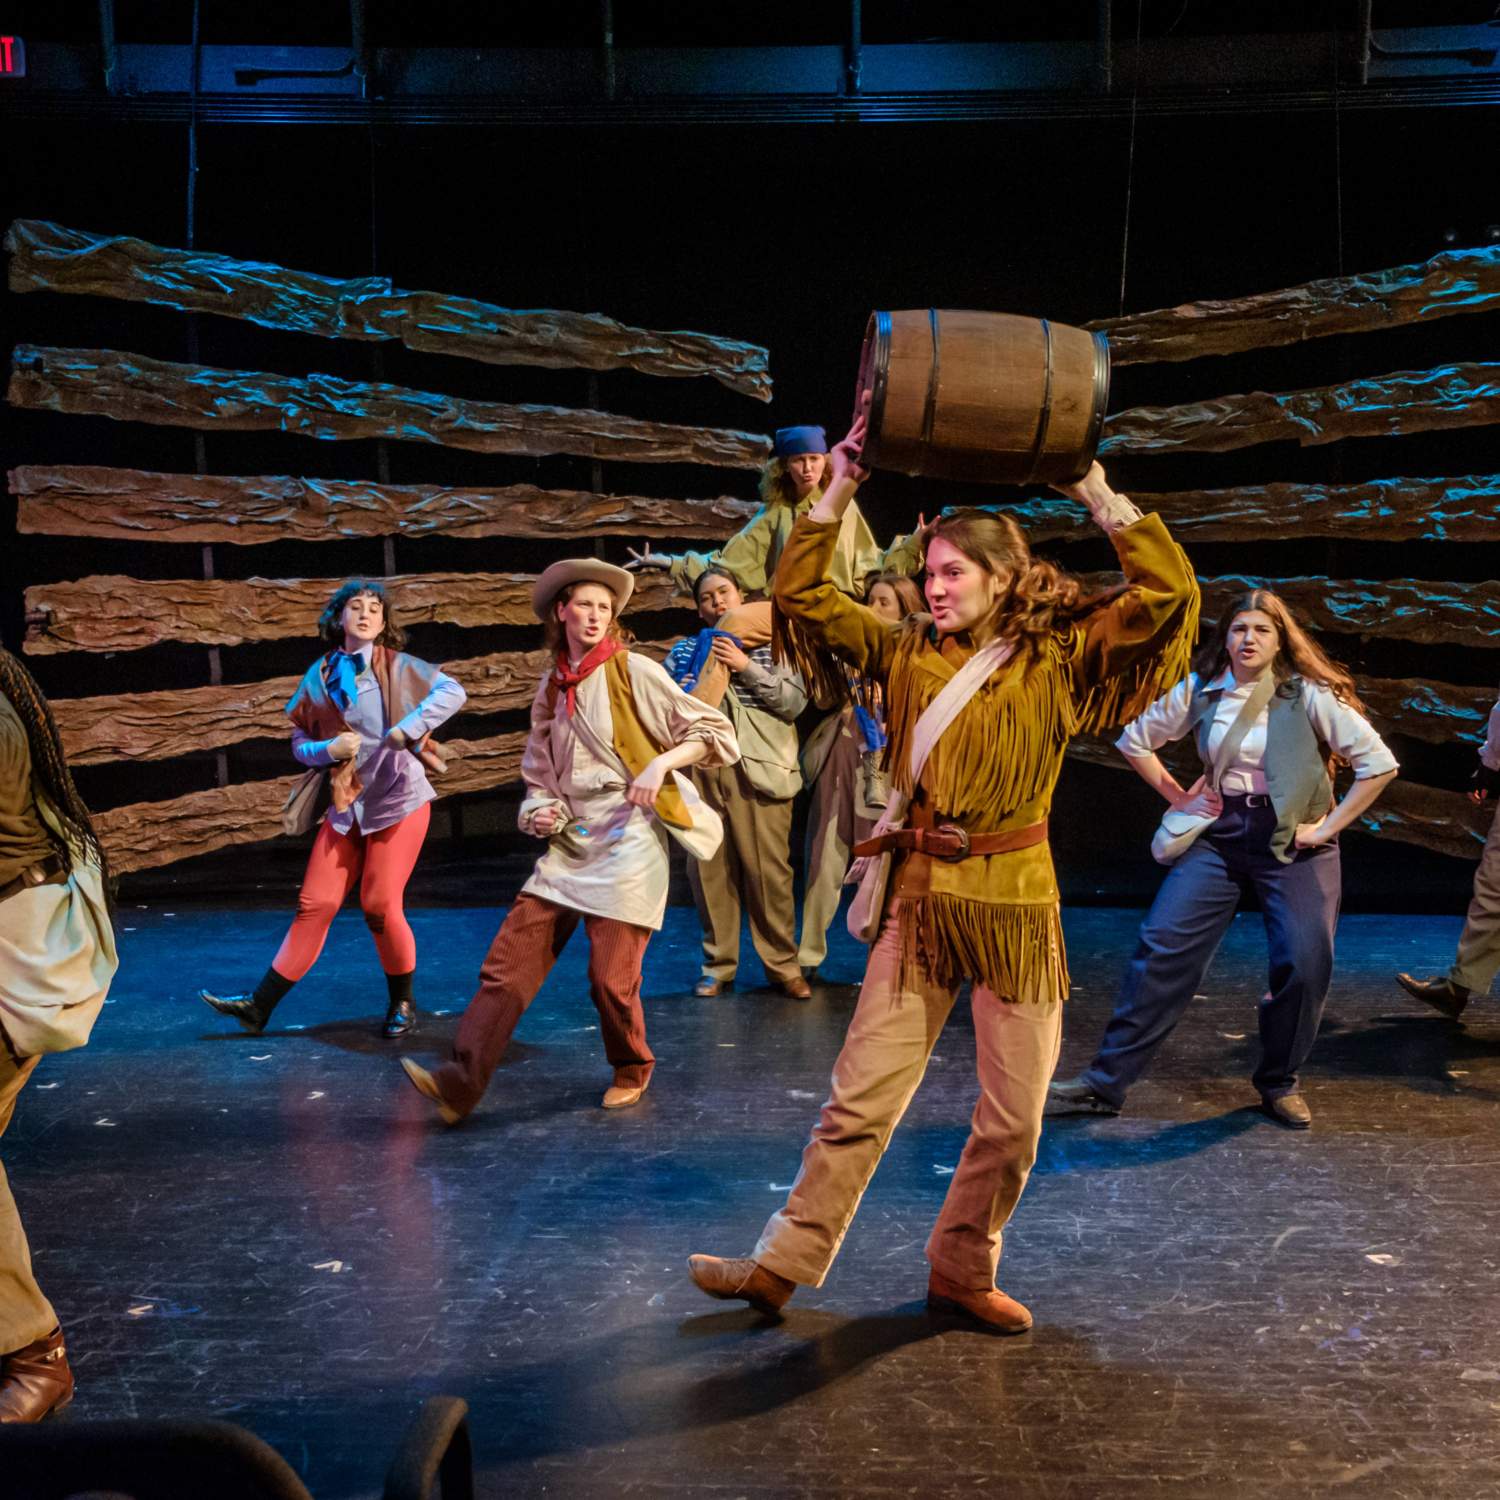 One woman in frontier clothing holds a barrel over her head while several other woman dance behind her, lifting one woman into the air. 